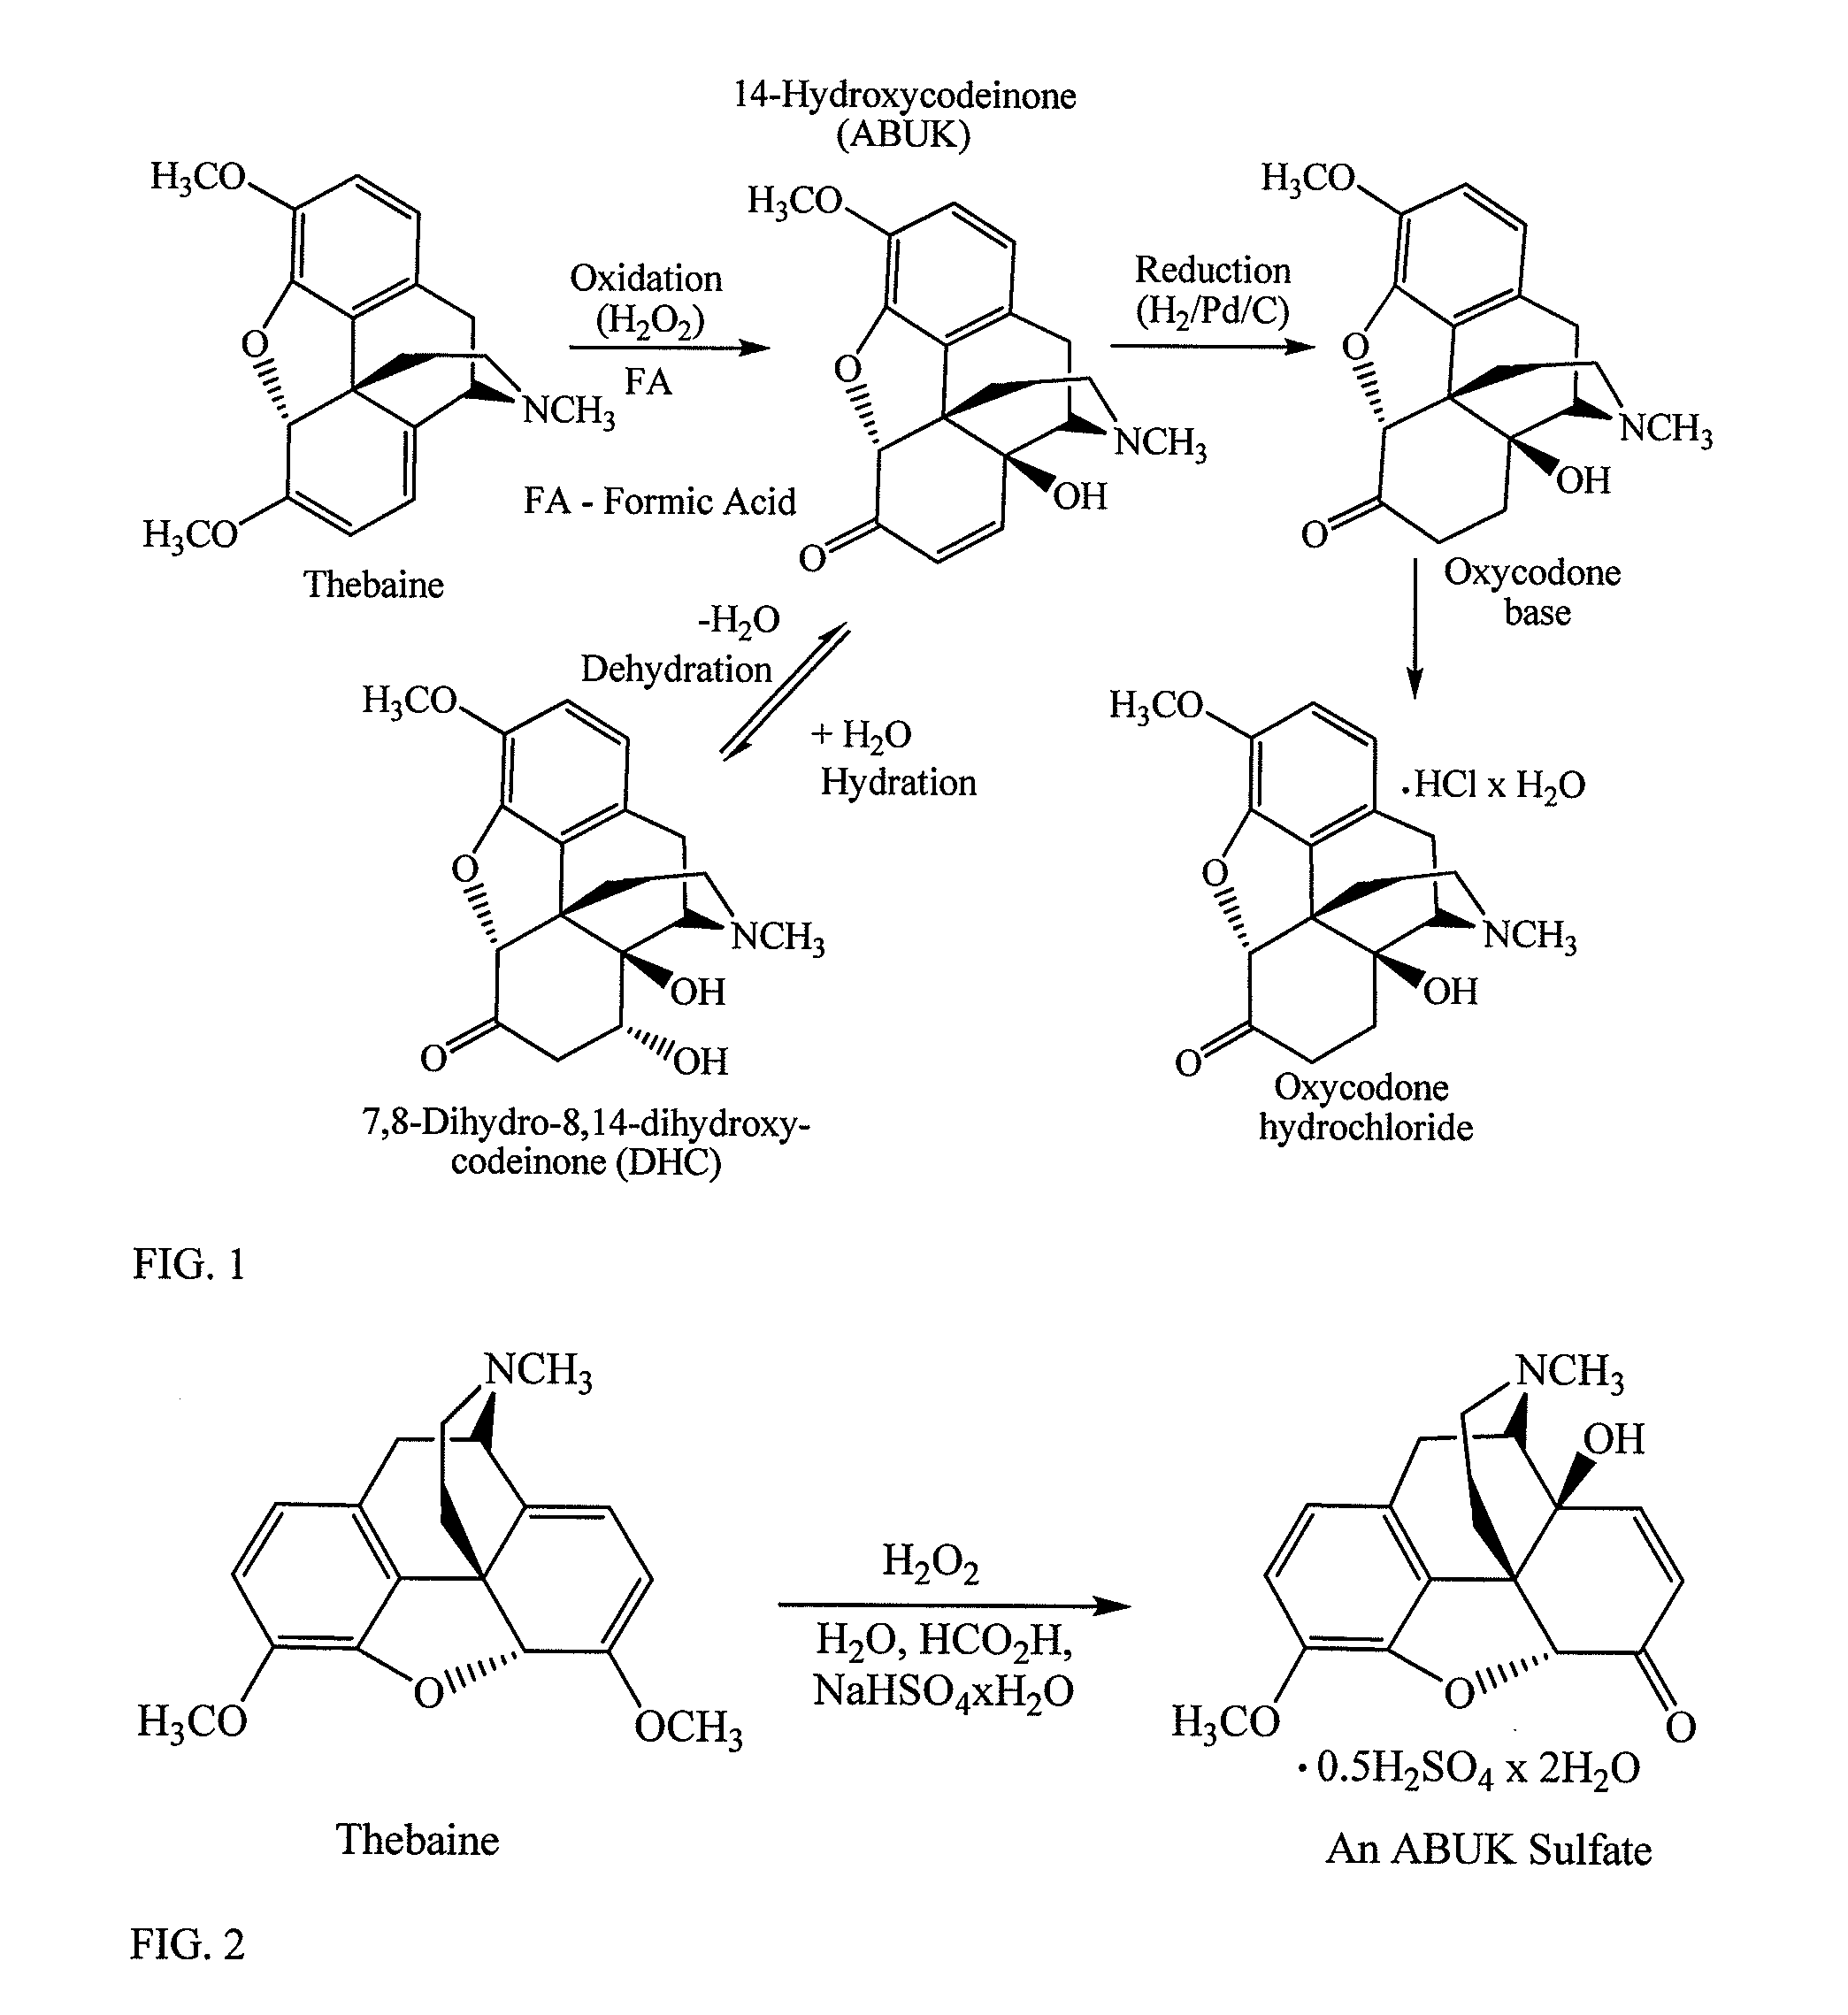 Conversion of oxycodone base to oxycodone hydrochloride